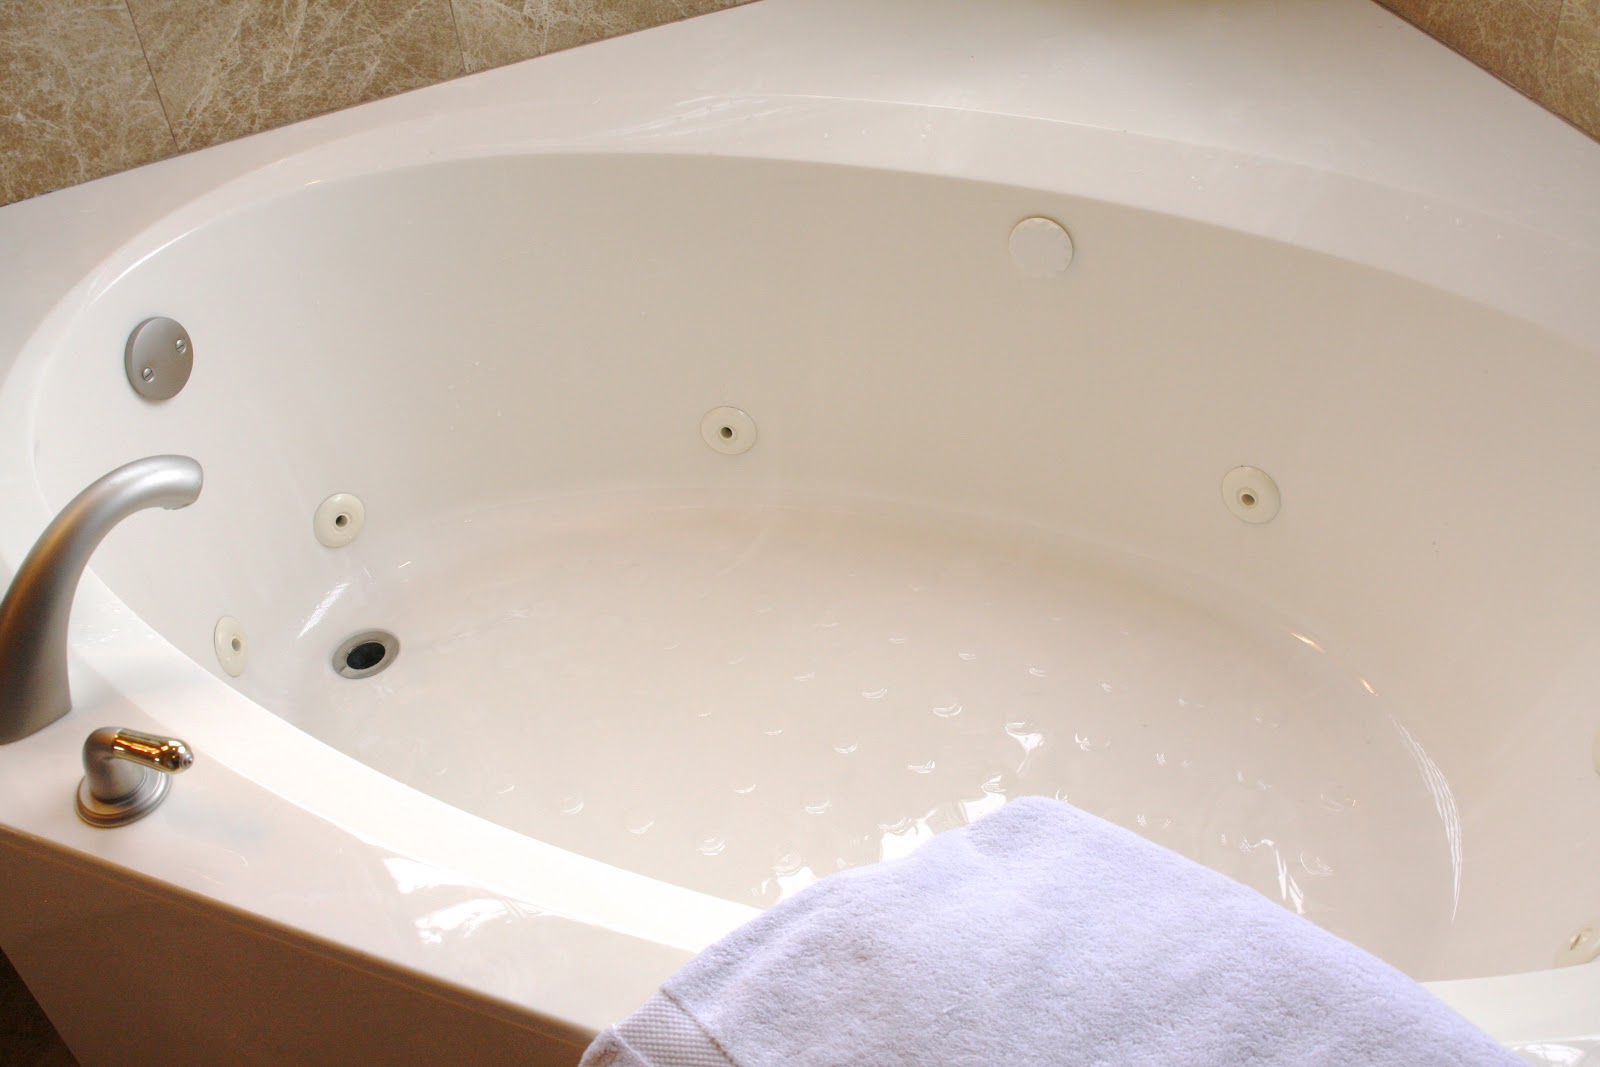 How To Clean Whirlpool Tub Jets, Best Way To Clean Your Bathtub Jets